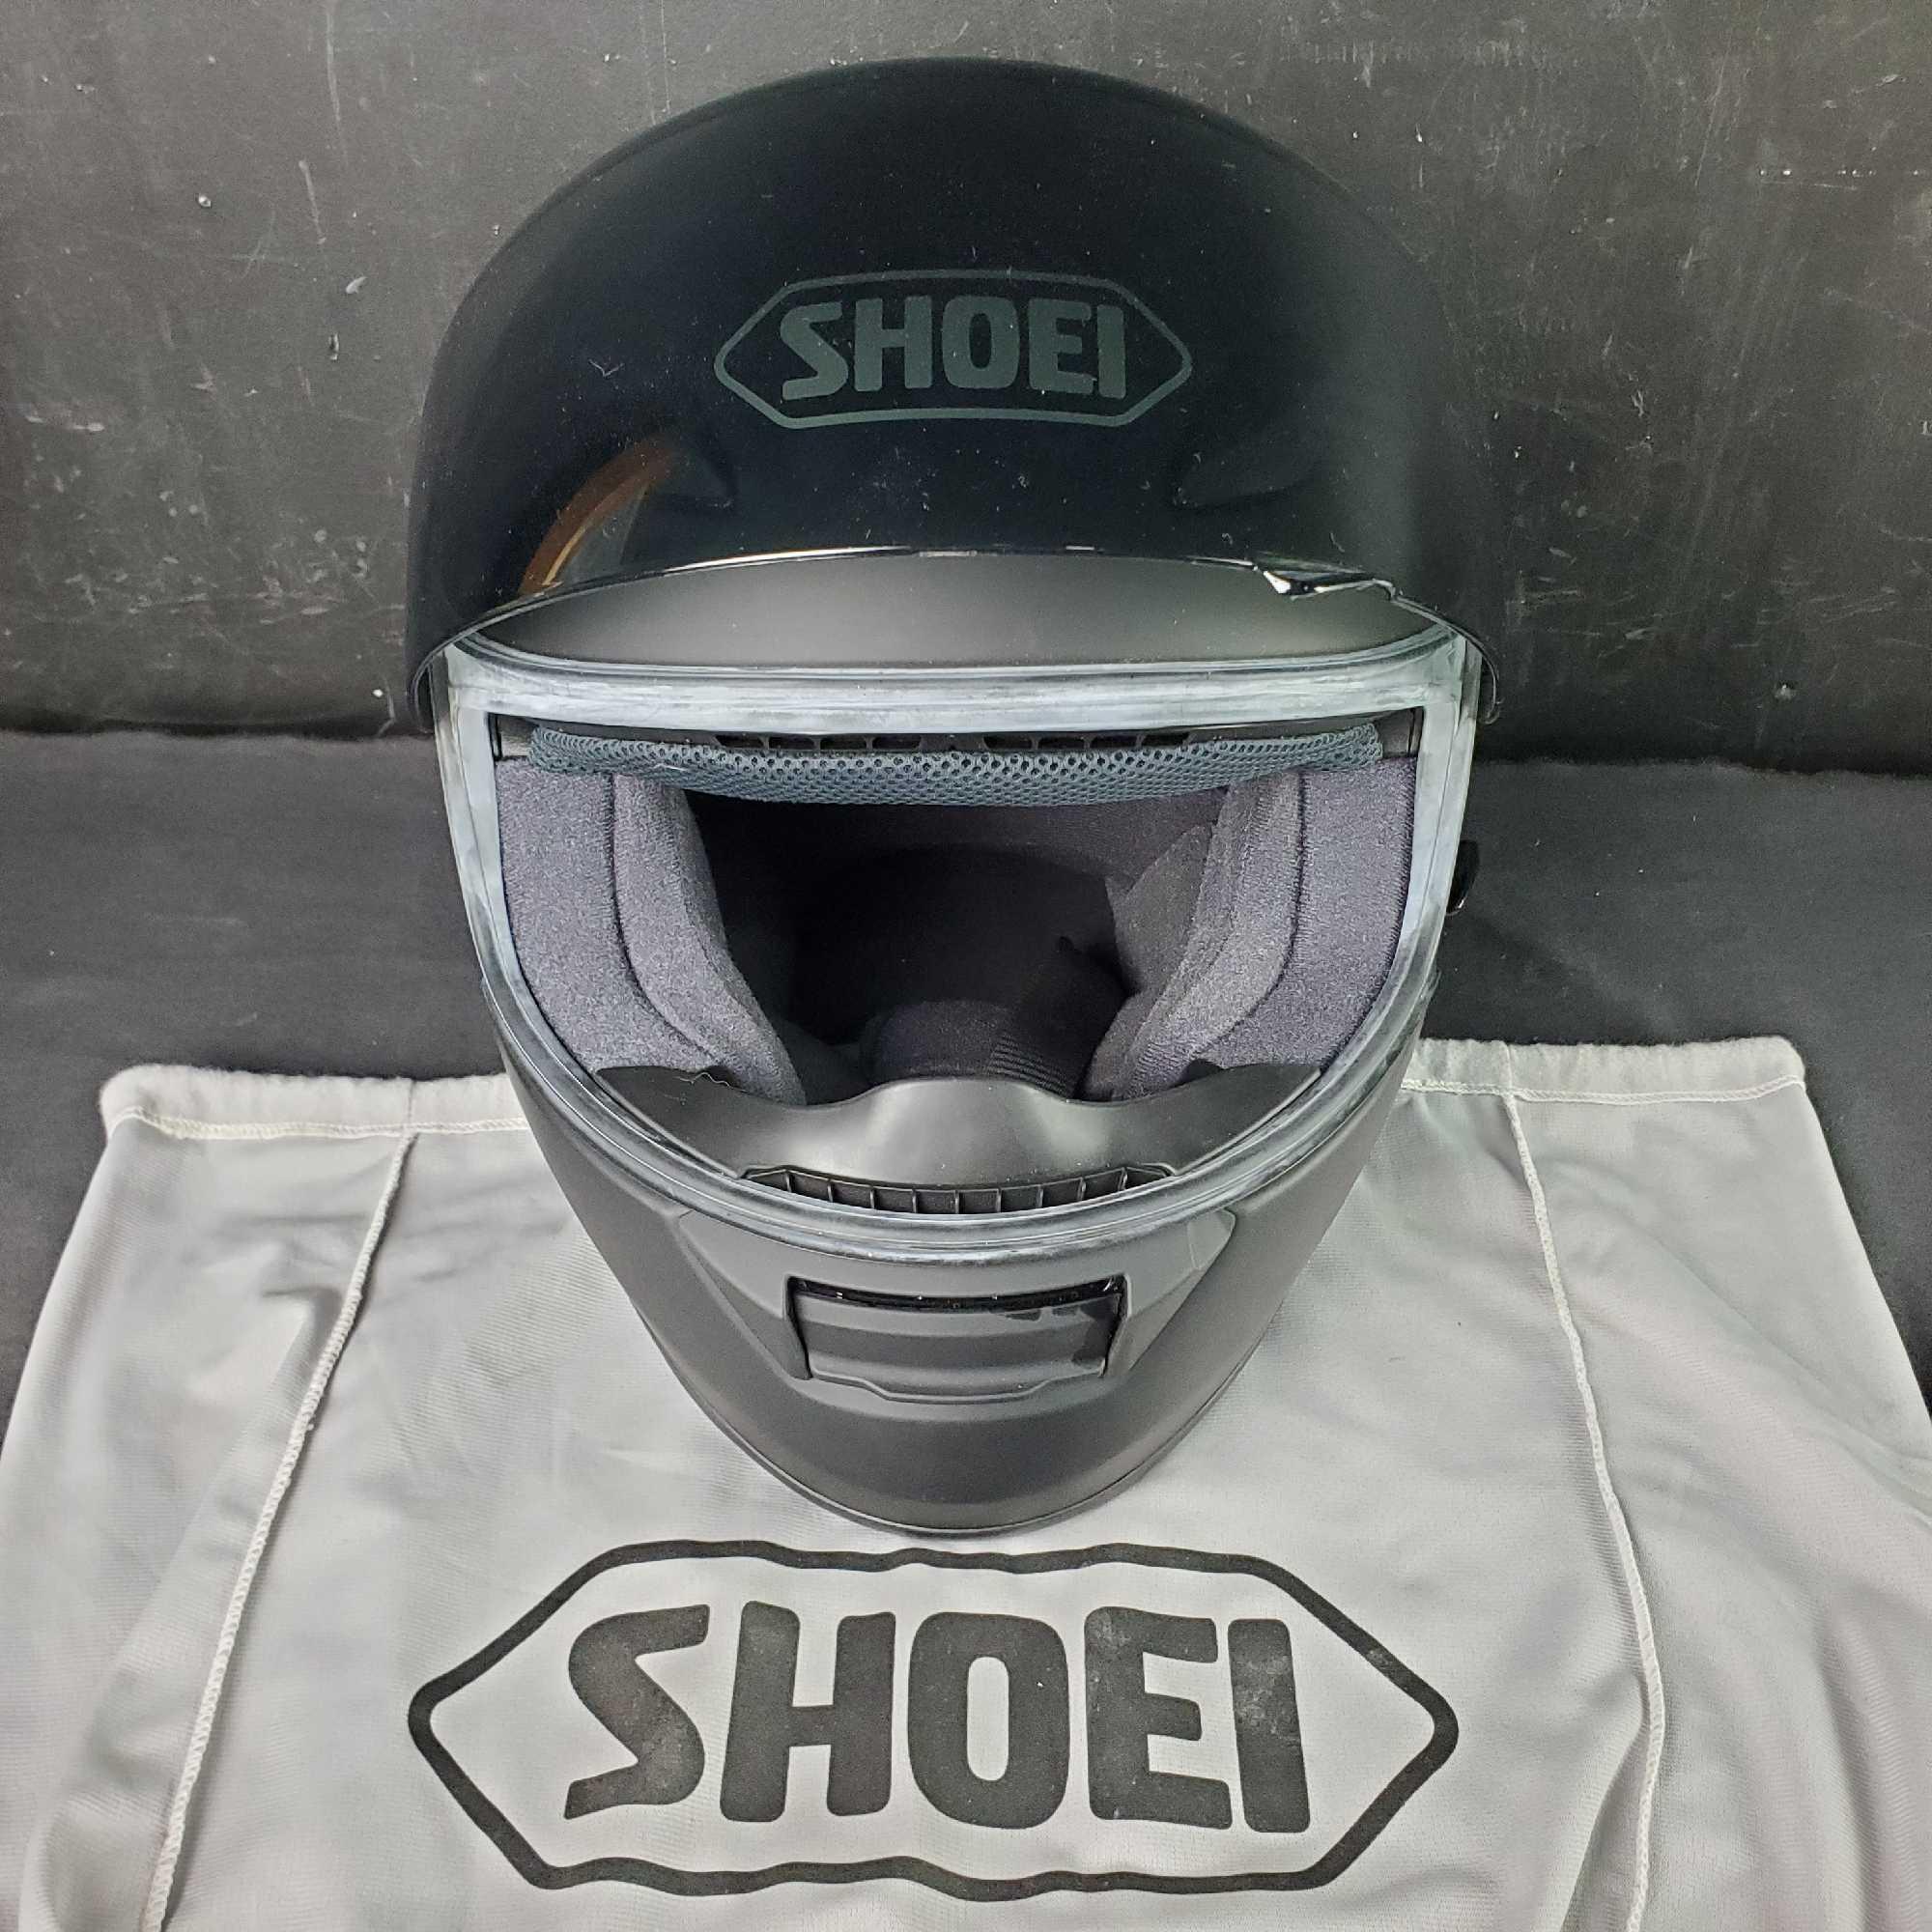 Shoei RF-1100 Matte black Full Face Motorcycle Street Riding Helmet size Large with bag